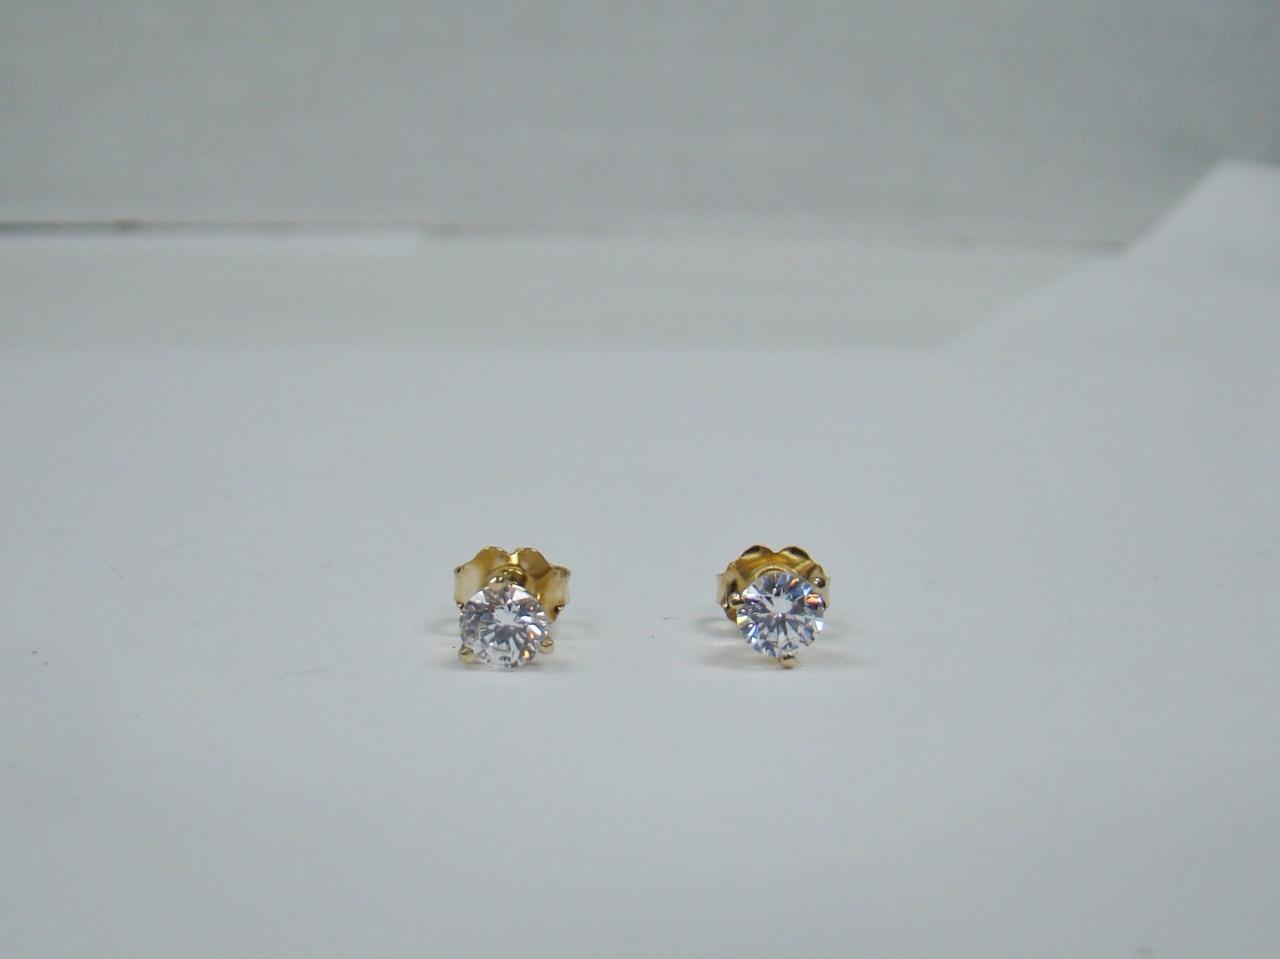 14K YELLOW GOLD MARTINI STUD SWAROVSKI EARRINGS ROUND SOLITAIRE CUBIC ...